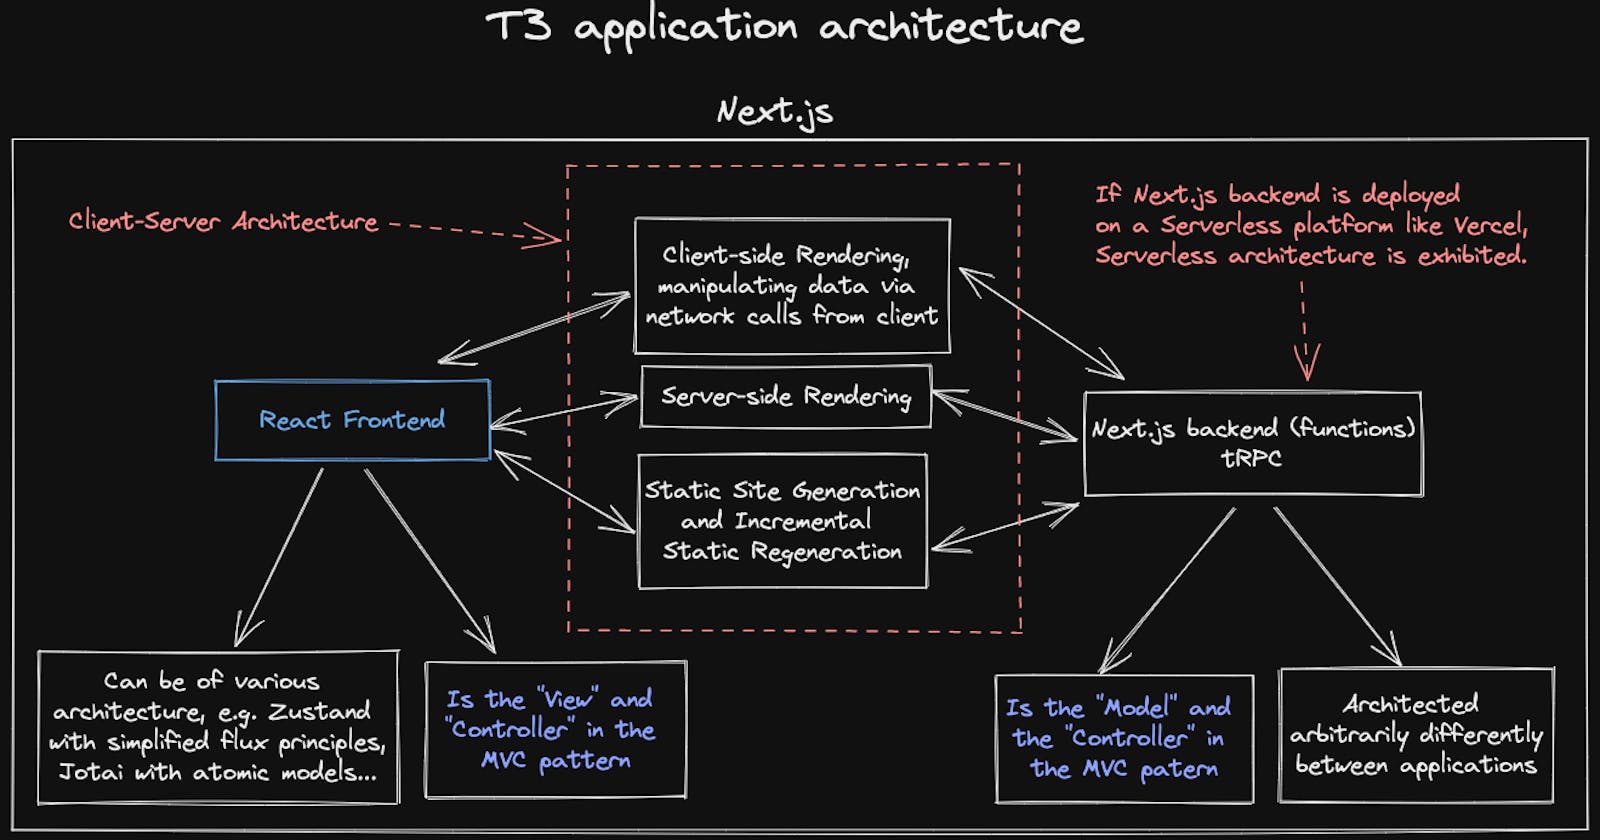 What is the architecture of the T3 application?